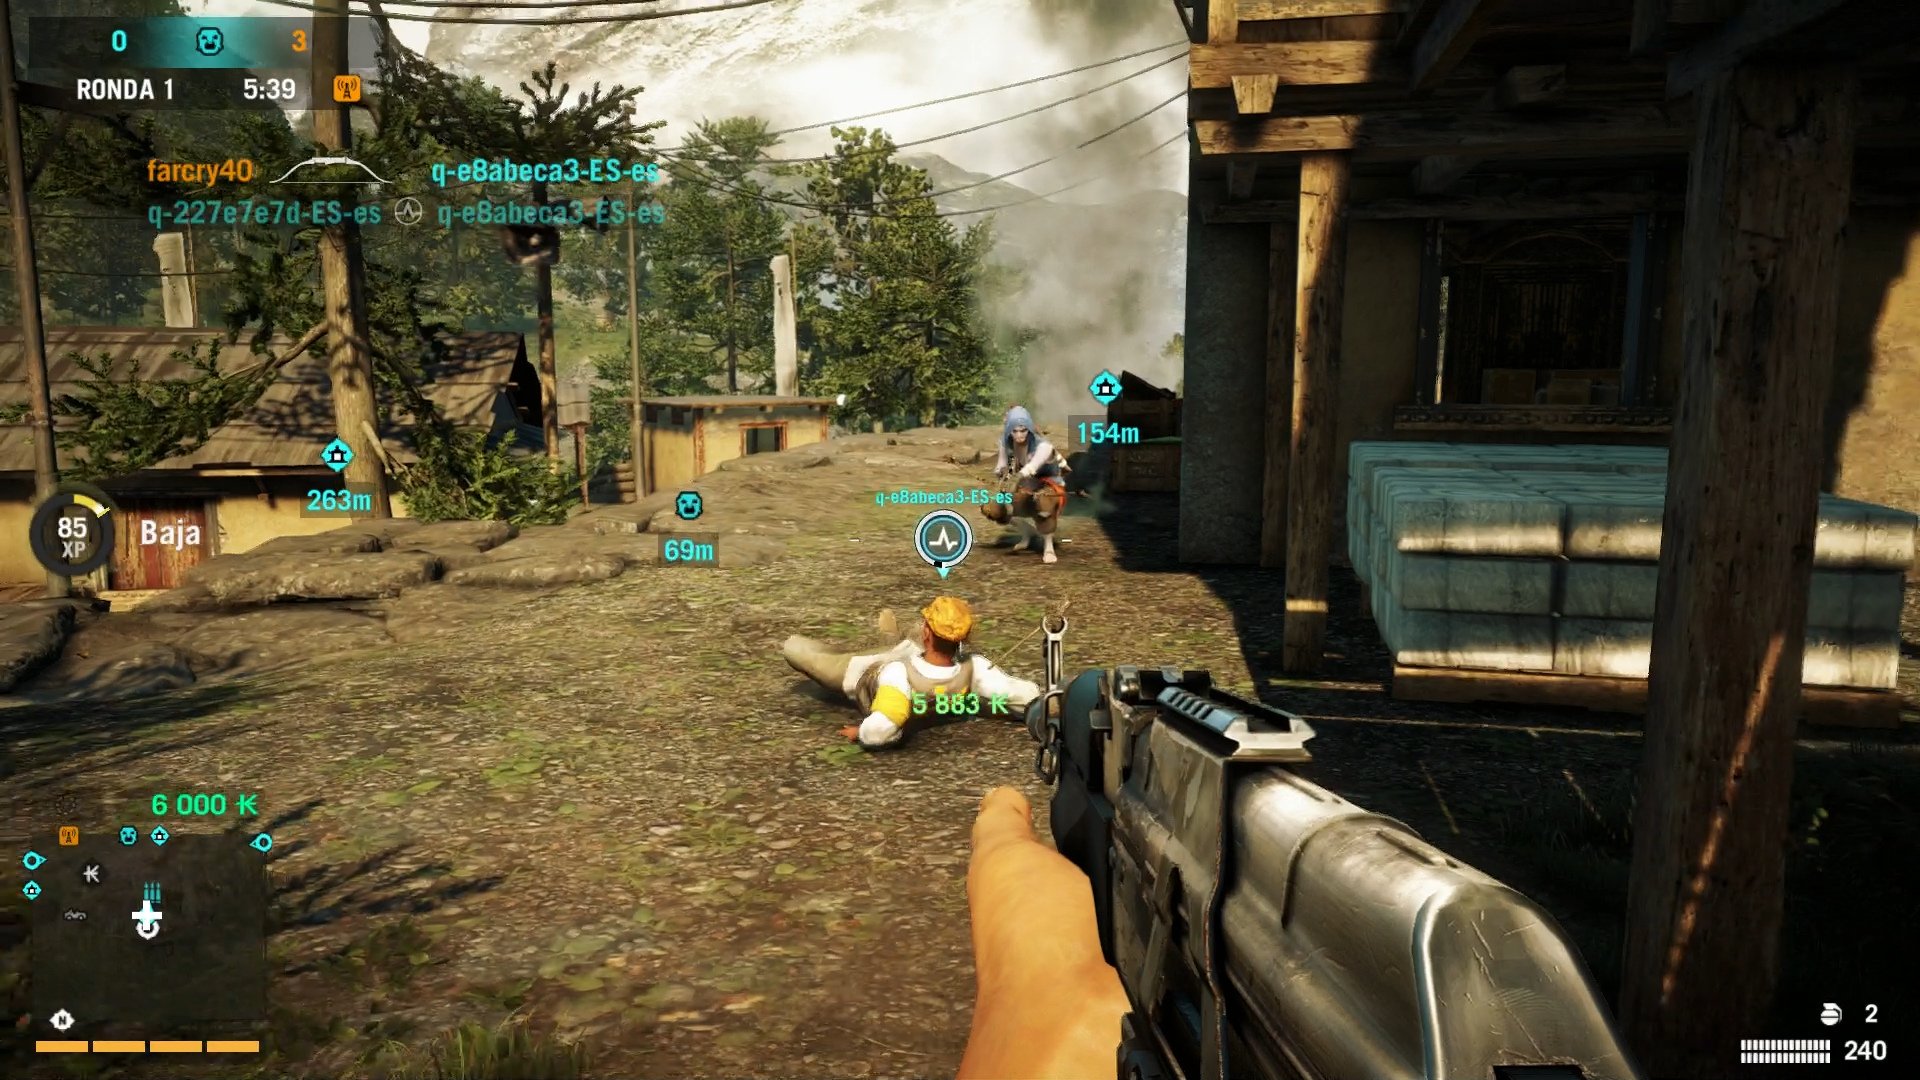 Far cry 4 for ppsspp windows 7